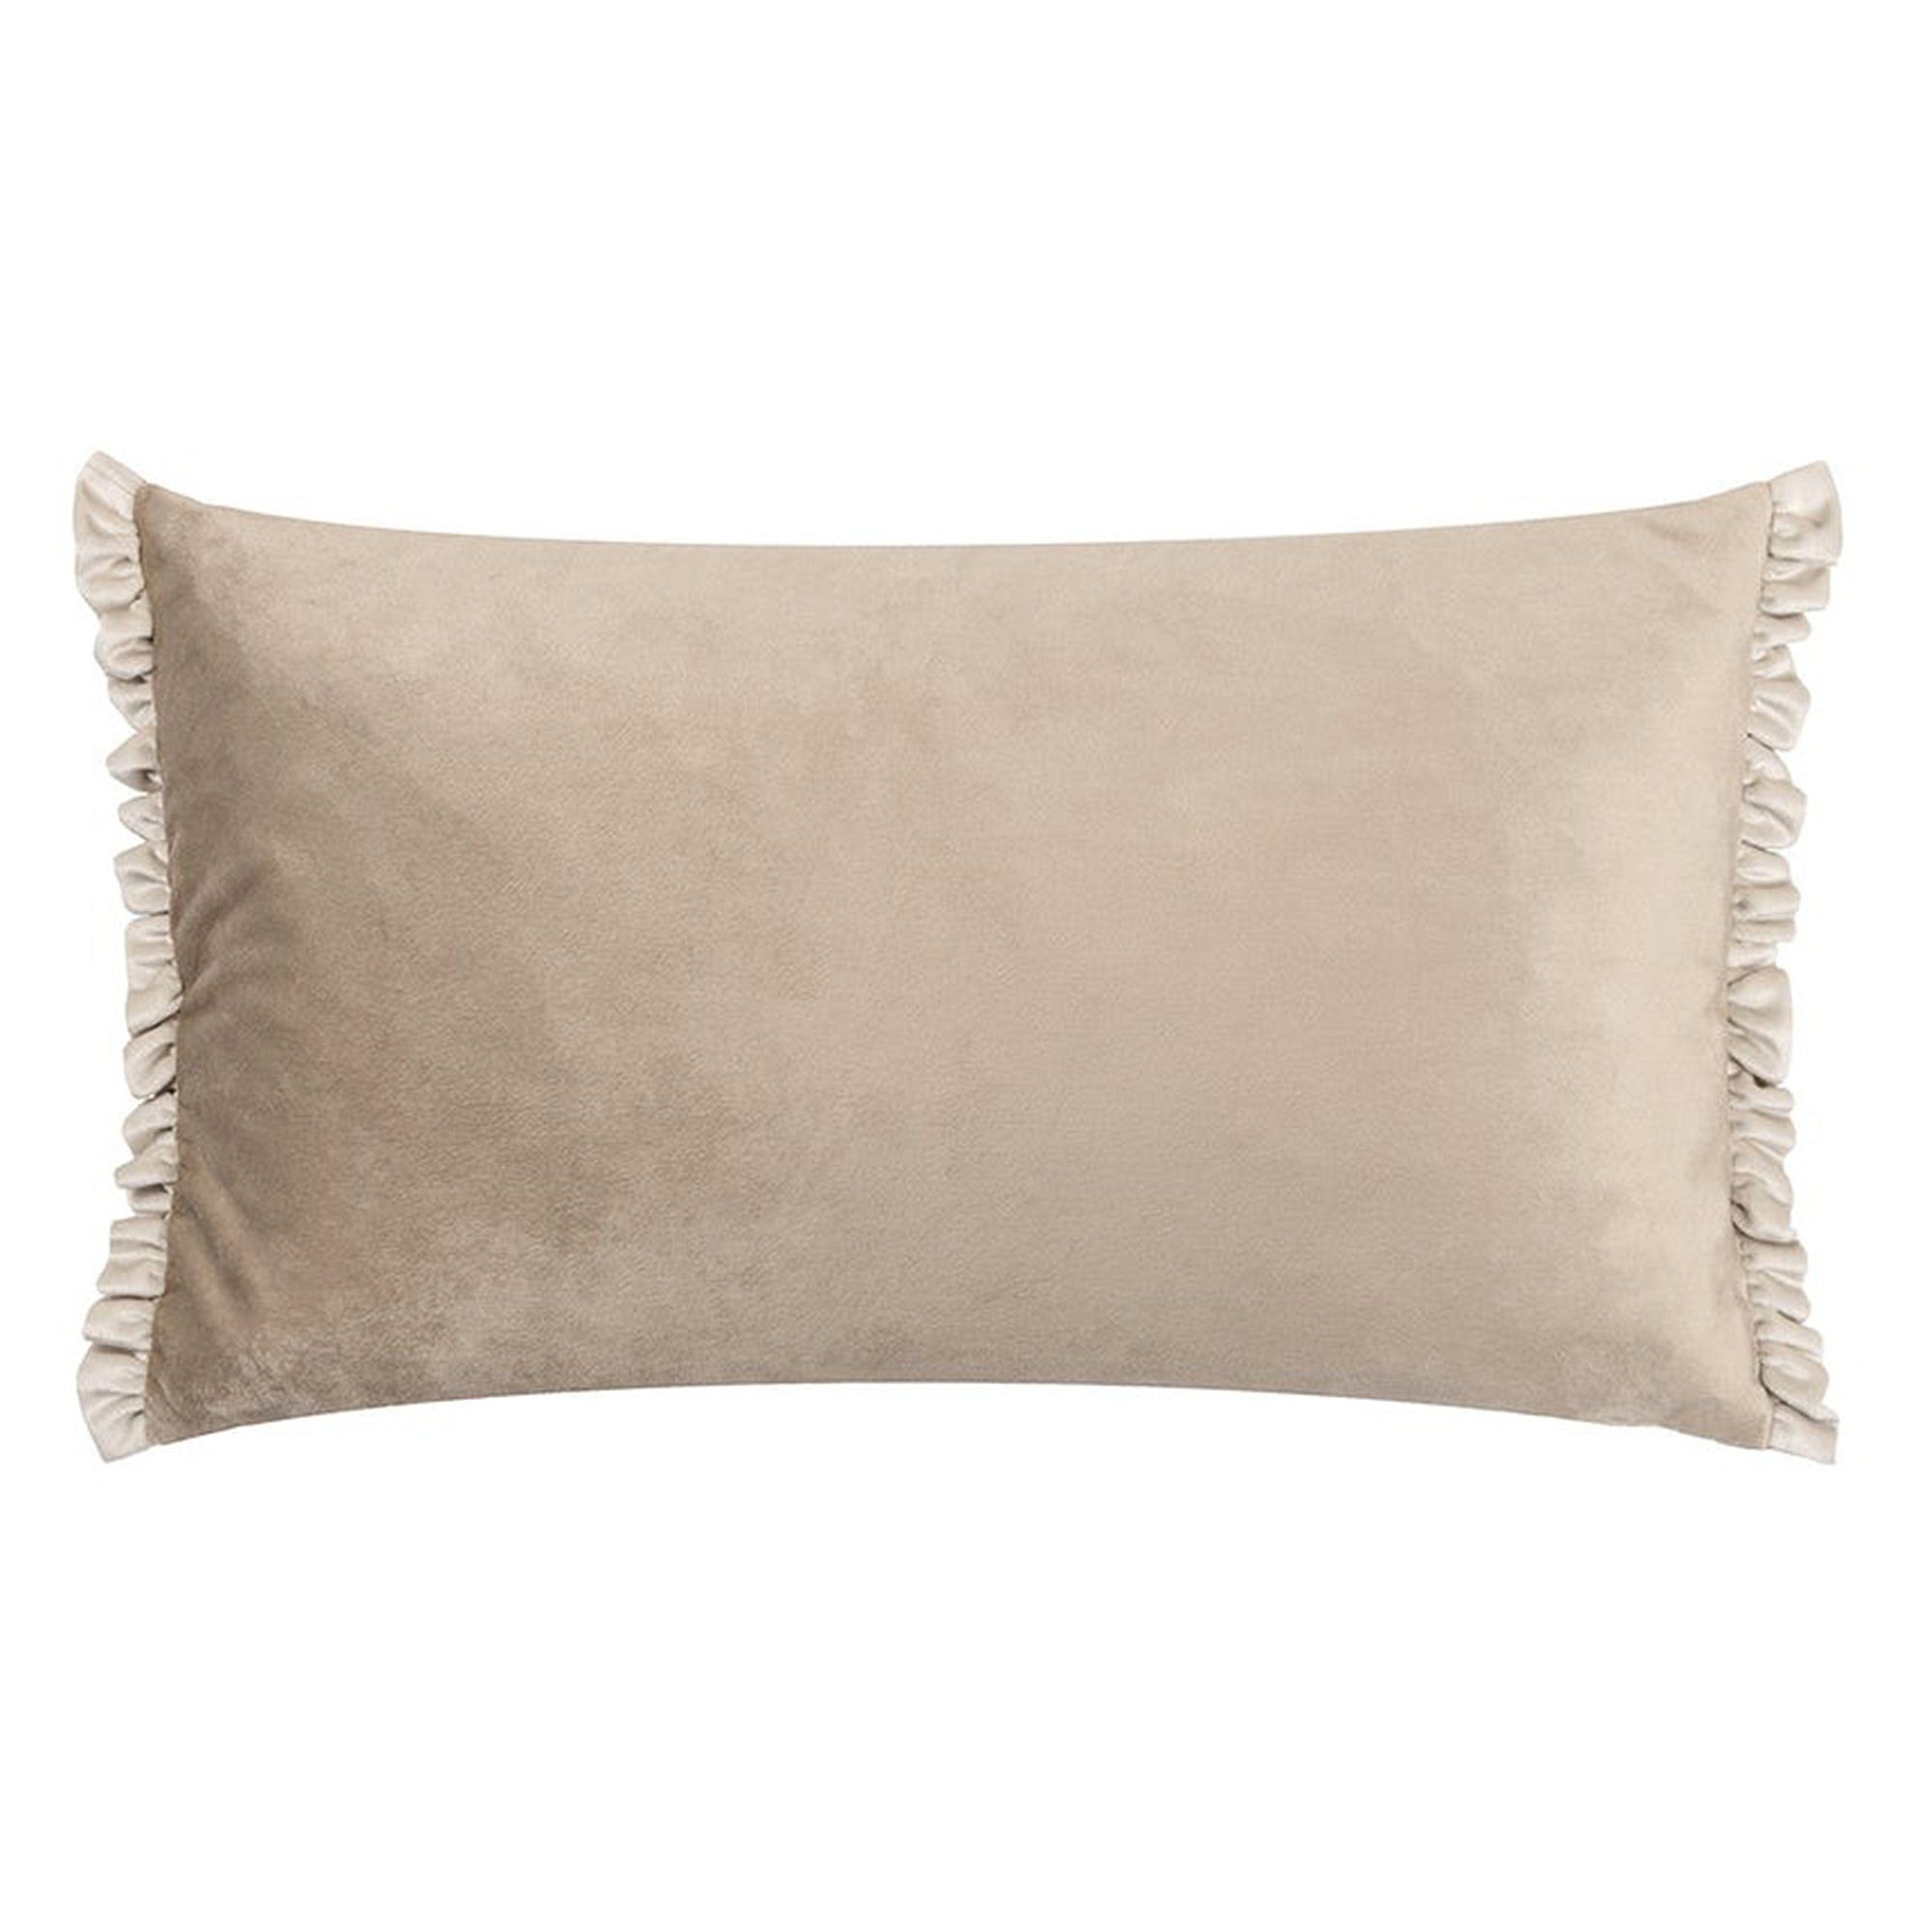 Chantilly Ruffle Velvet Cushion in Oyster - image 1